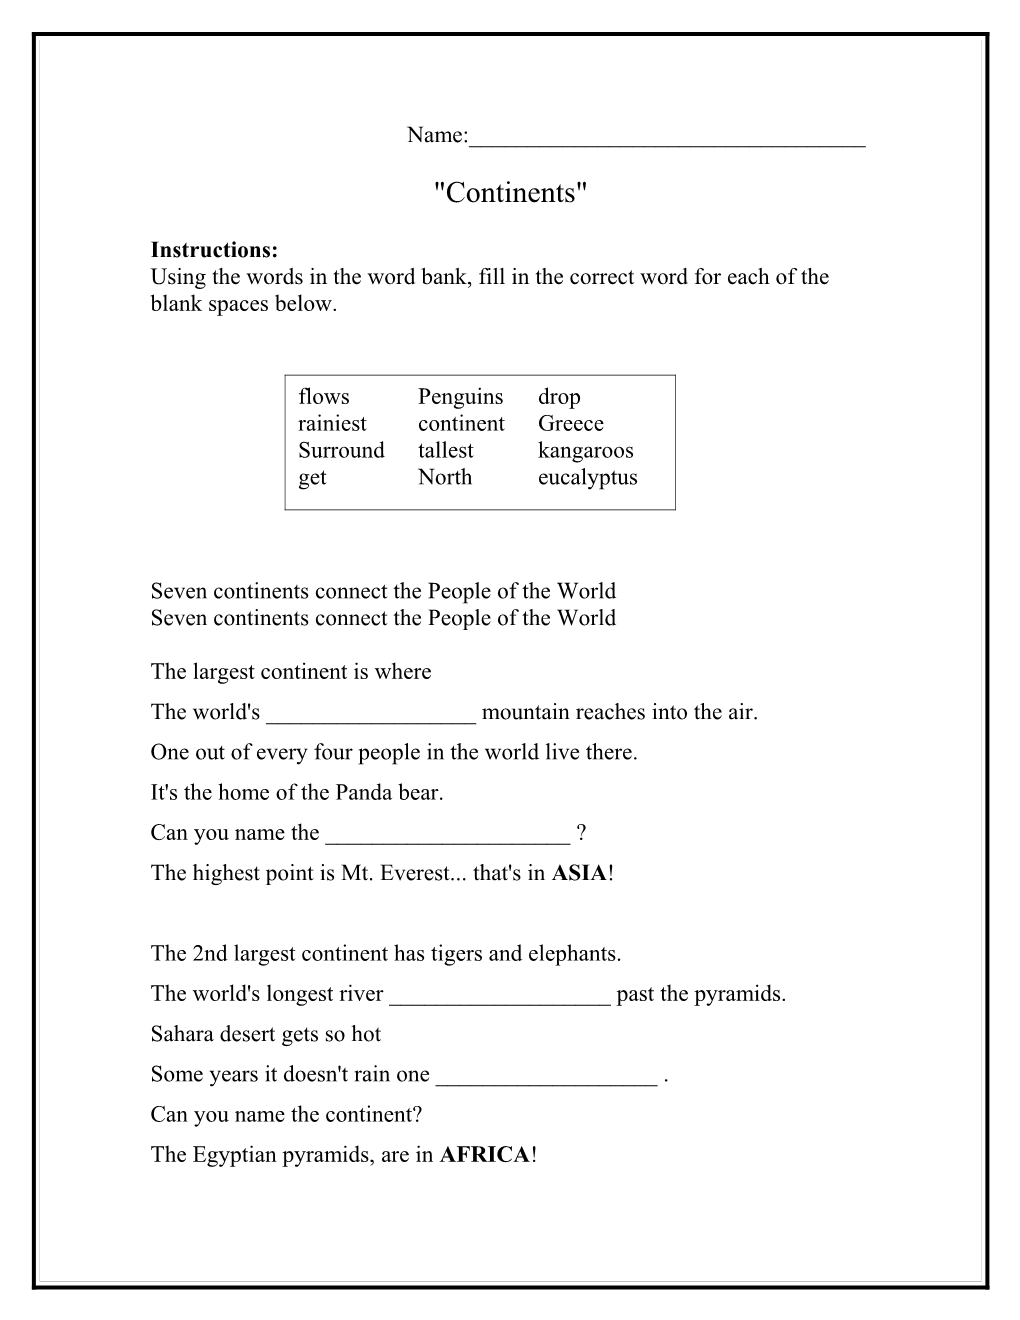 Continents Cloze Reading Exercise